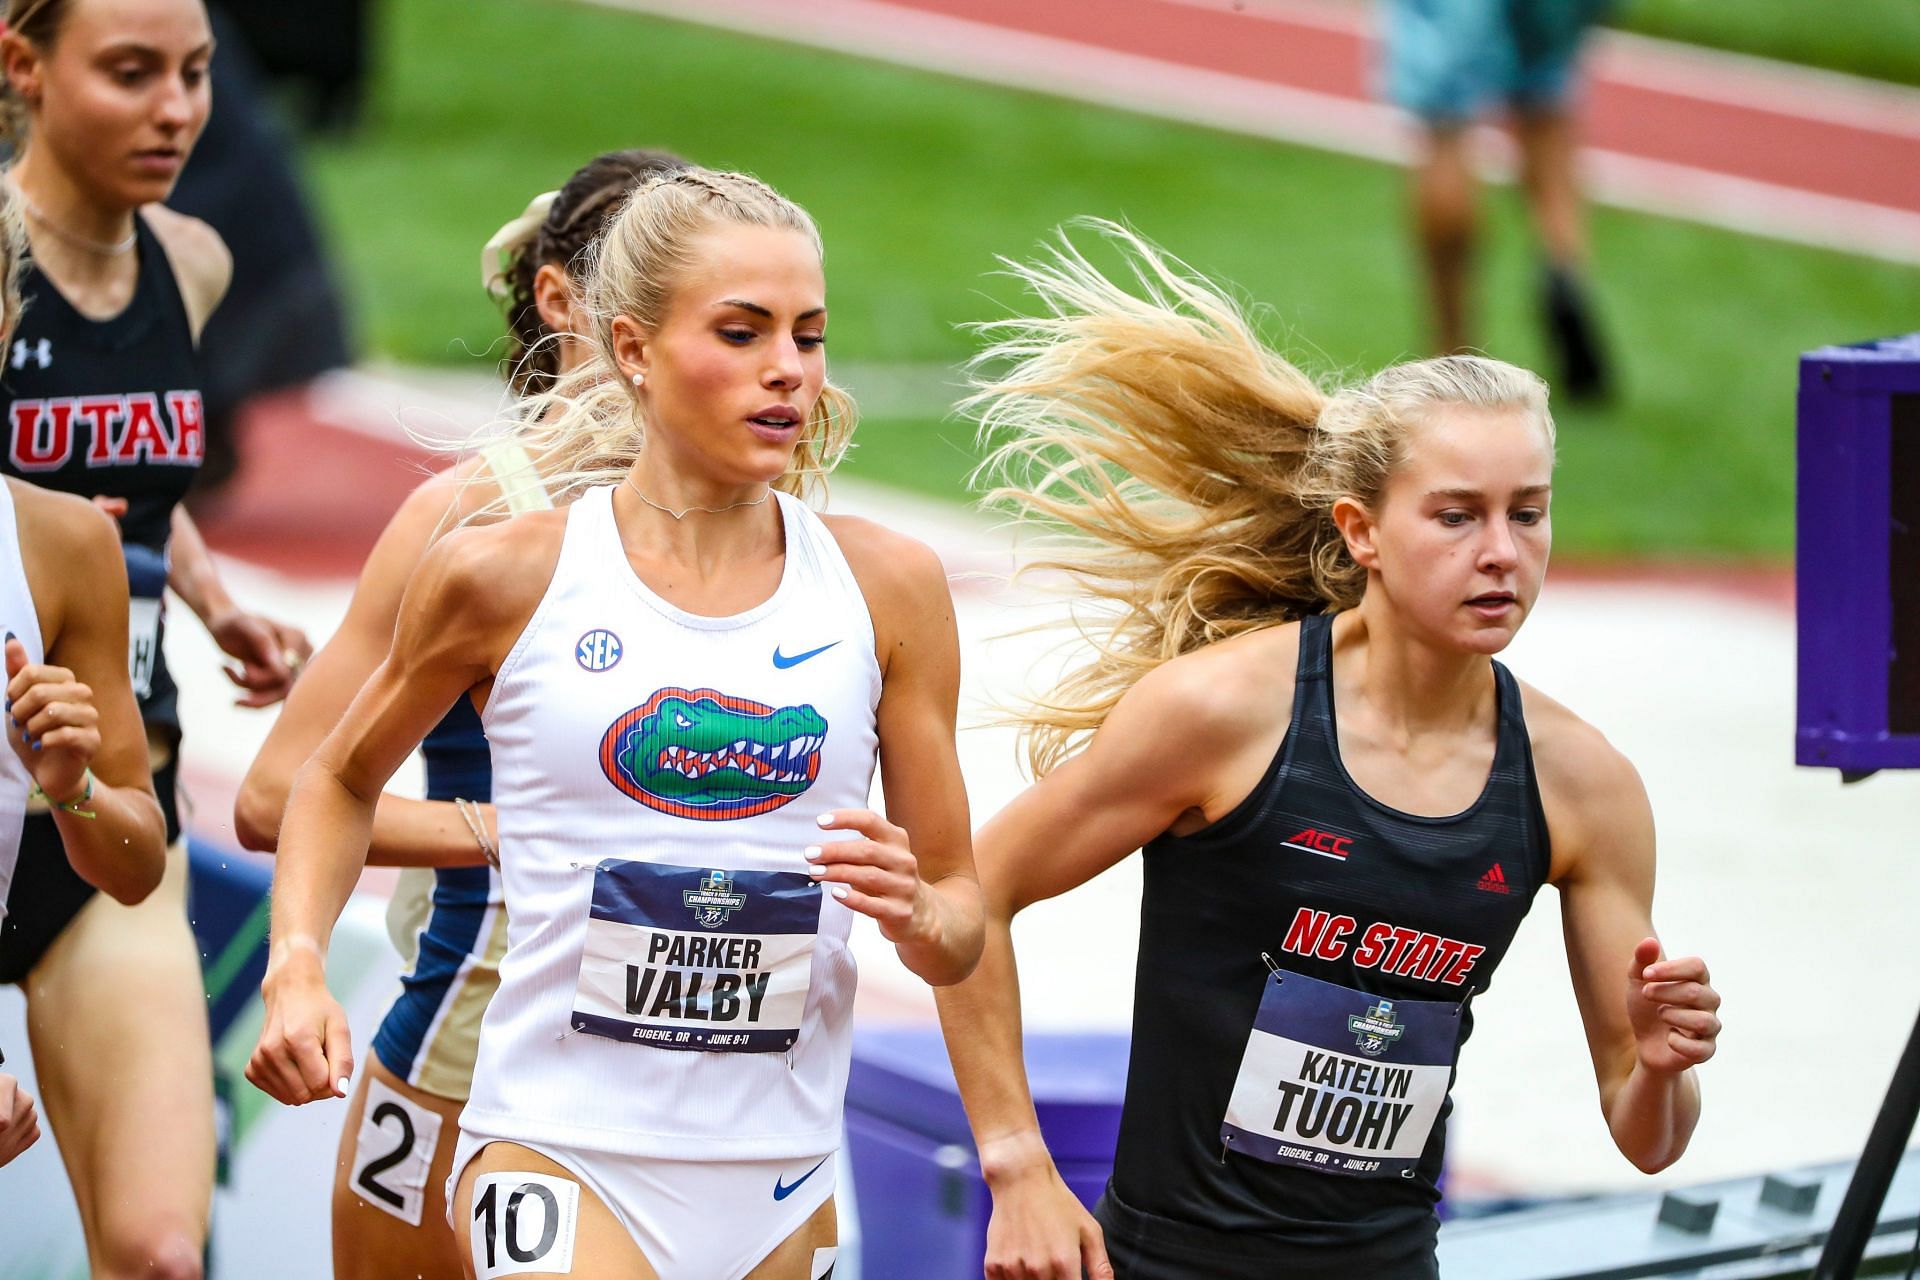 Parker Valby [Image: Gators Track and Field &amp; Cross Country]